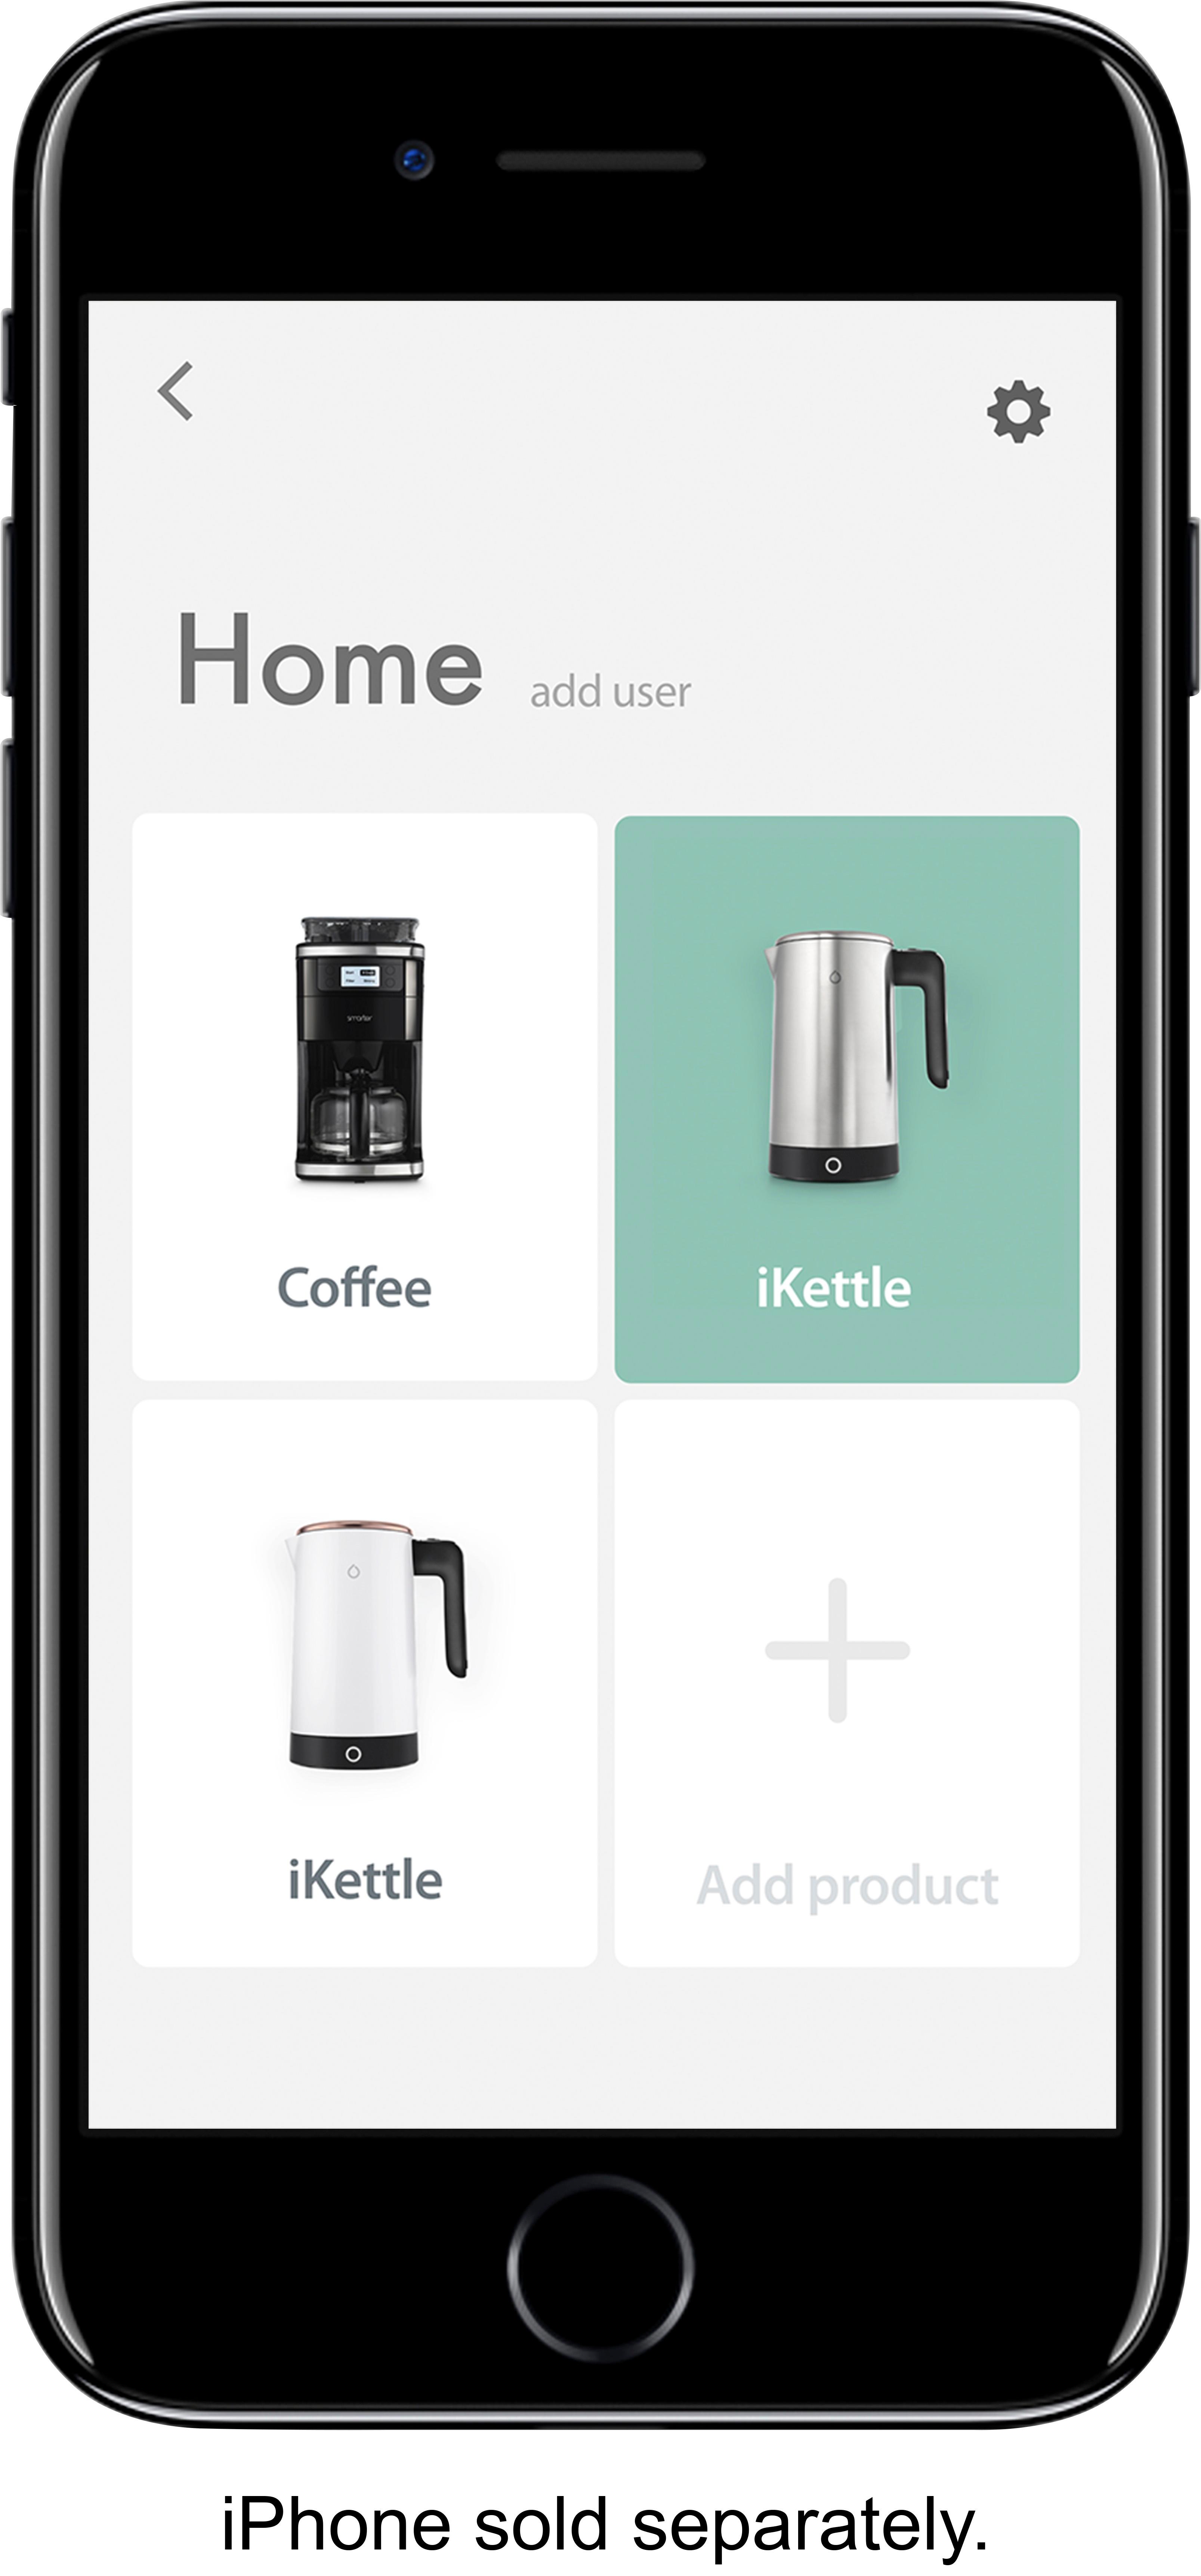 Smarter Coffee - 2nd Generation - Bean to Cup Smart Coffee Maker